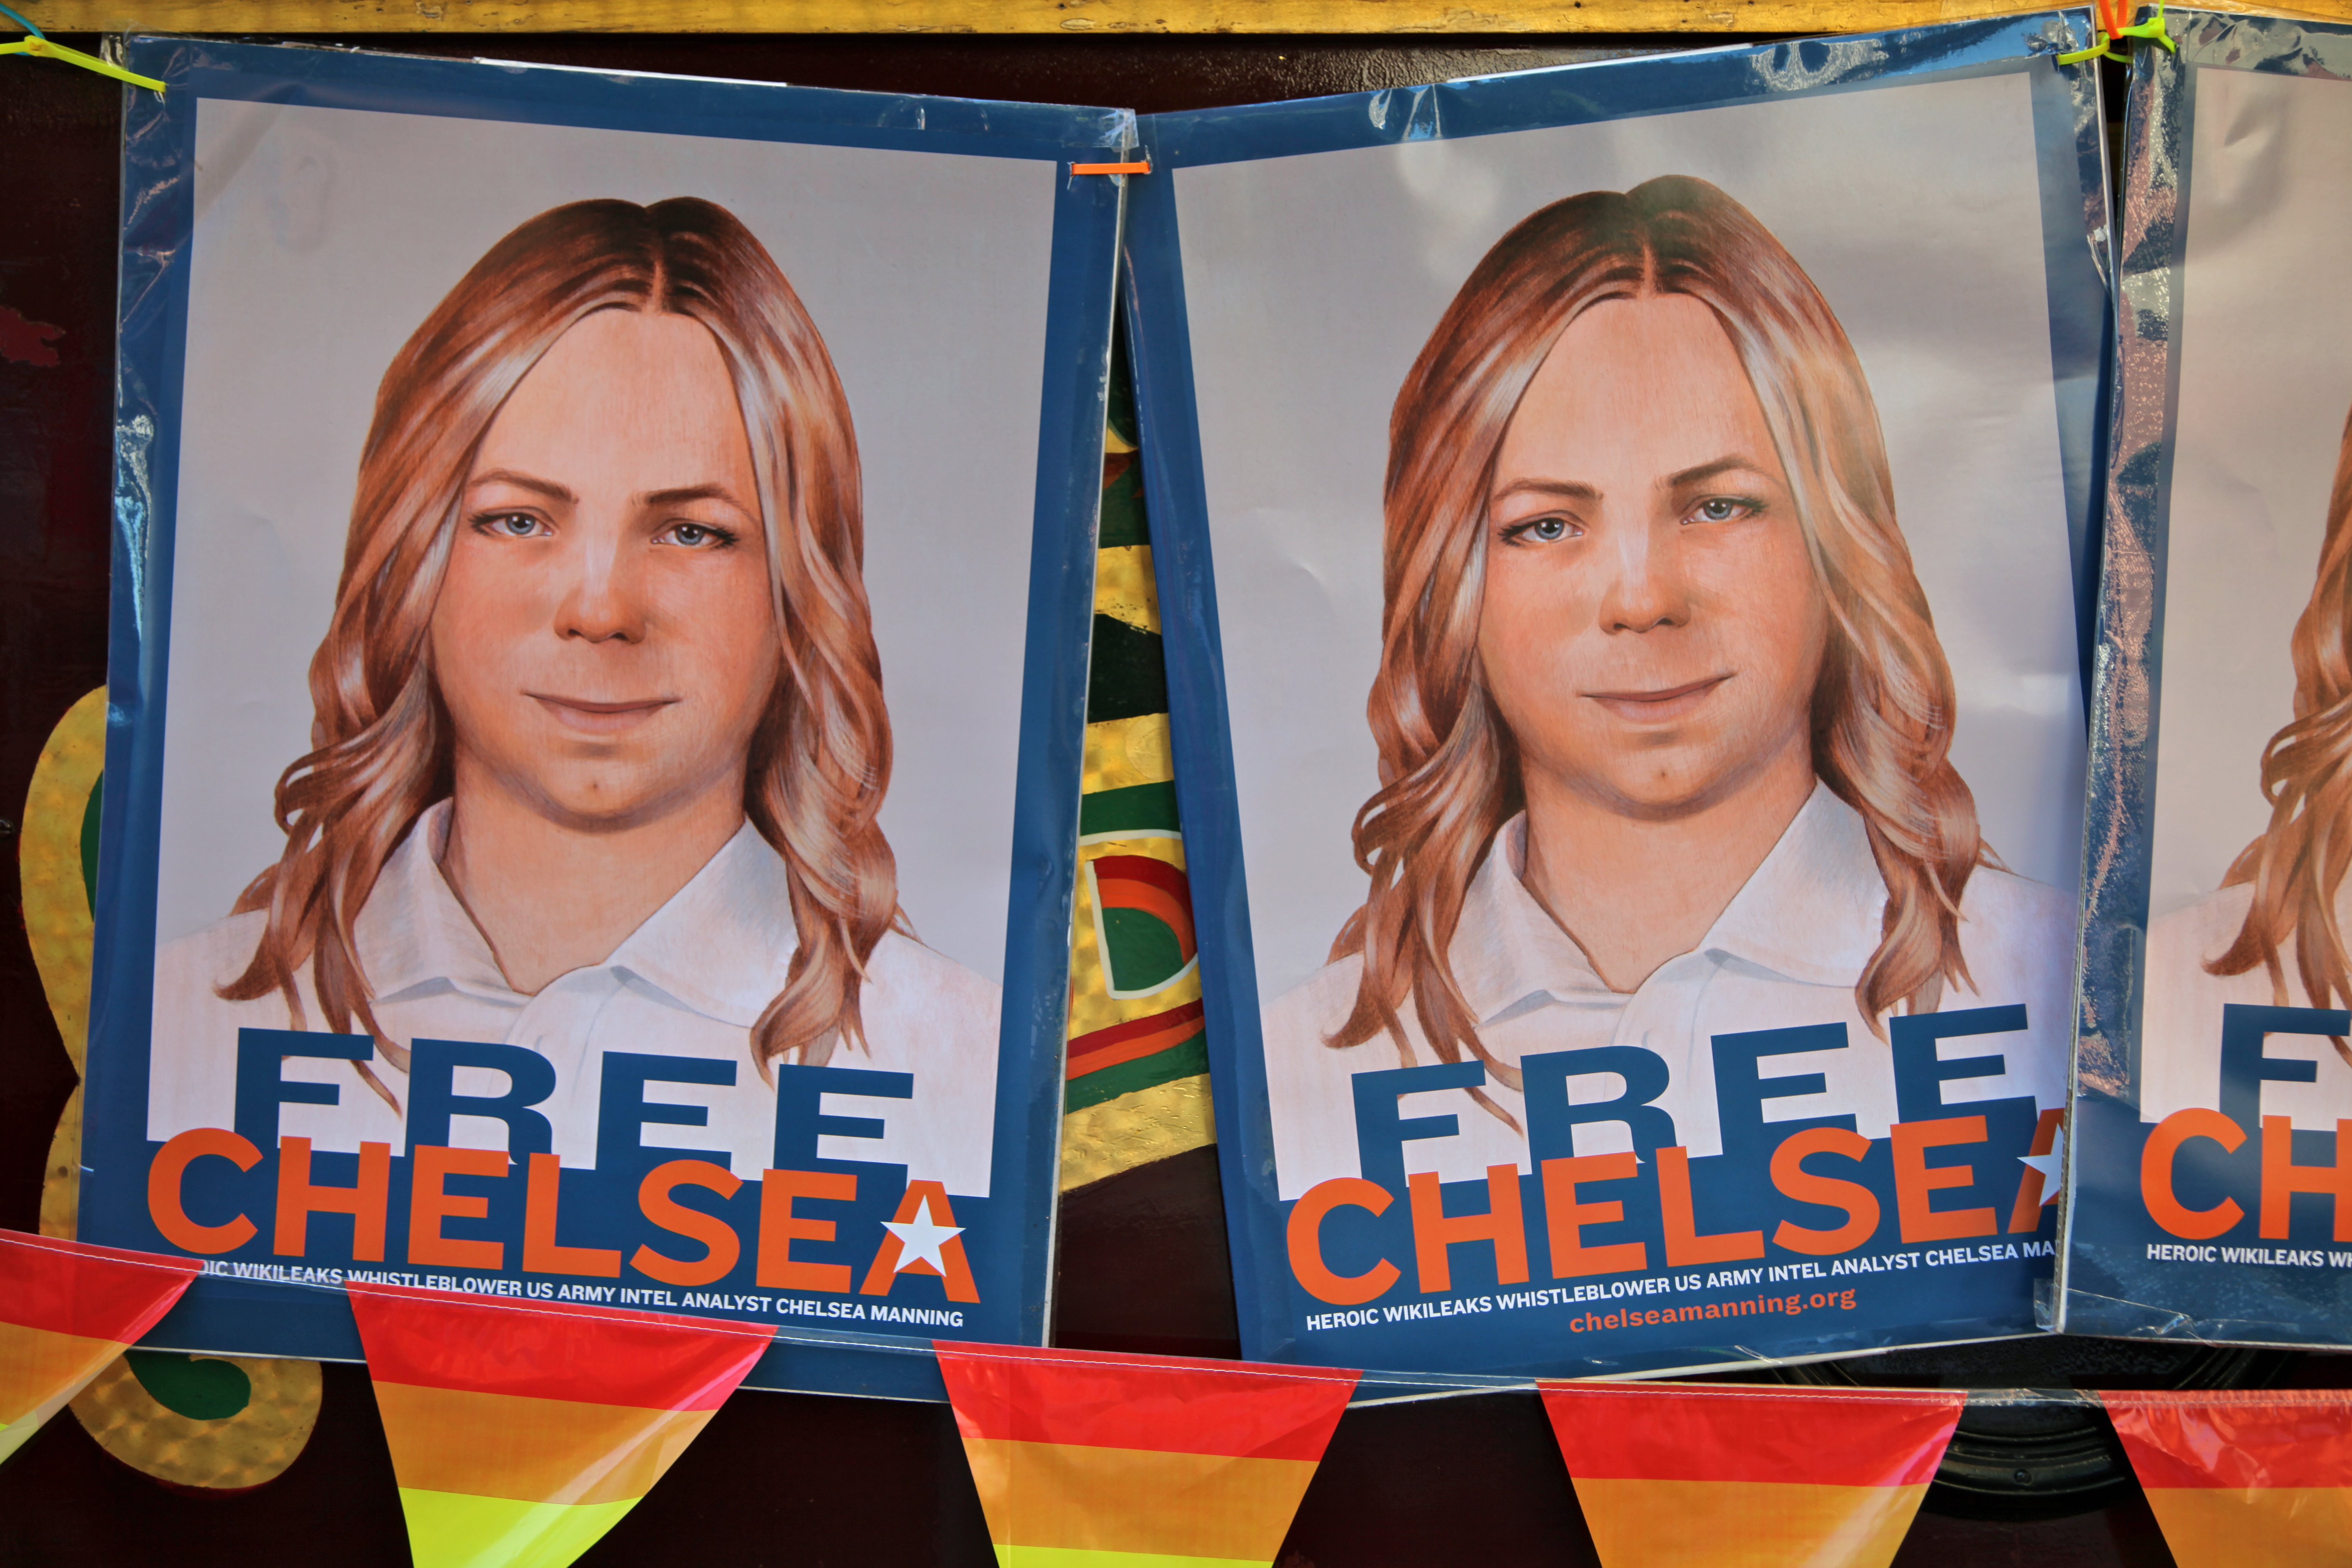 Free Chelsea Manning!